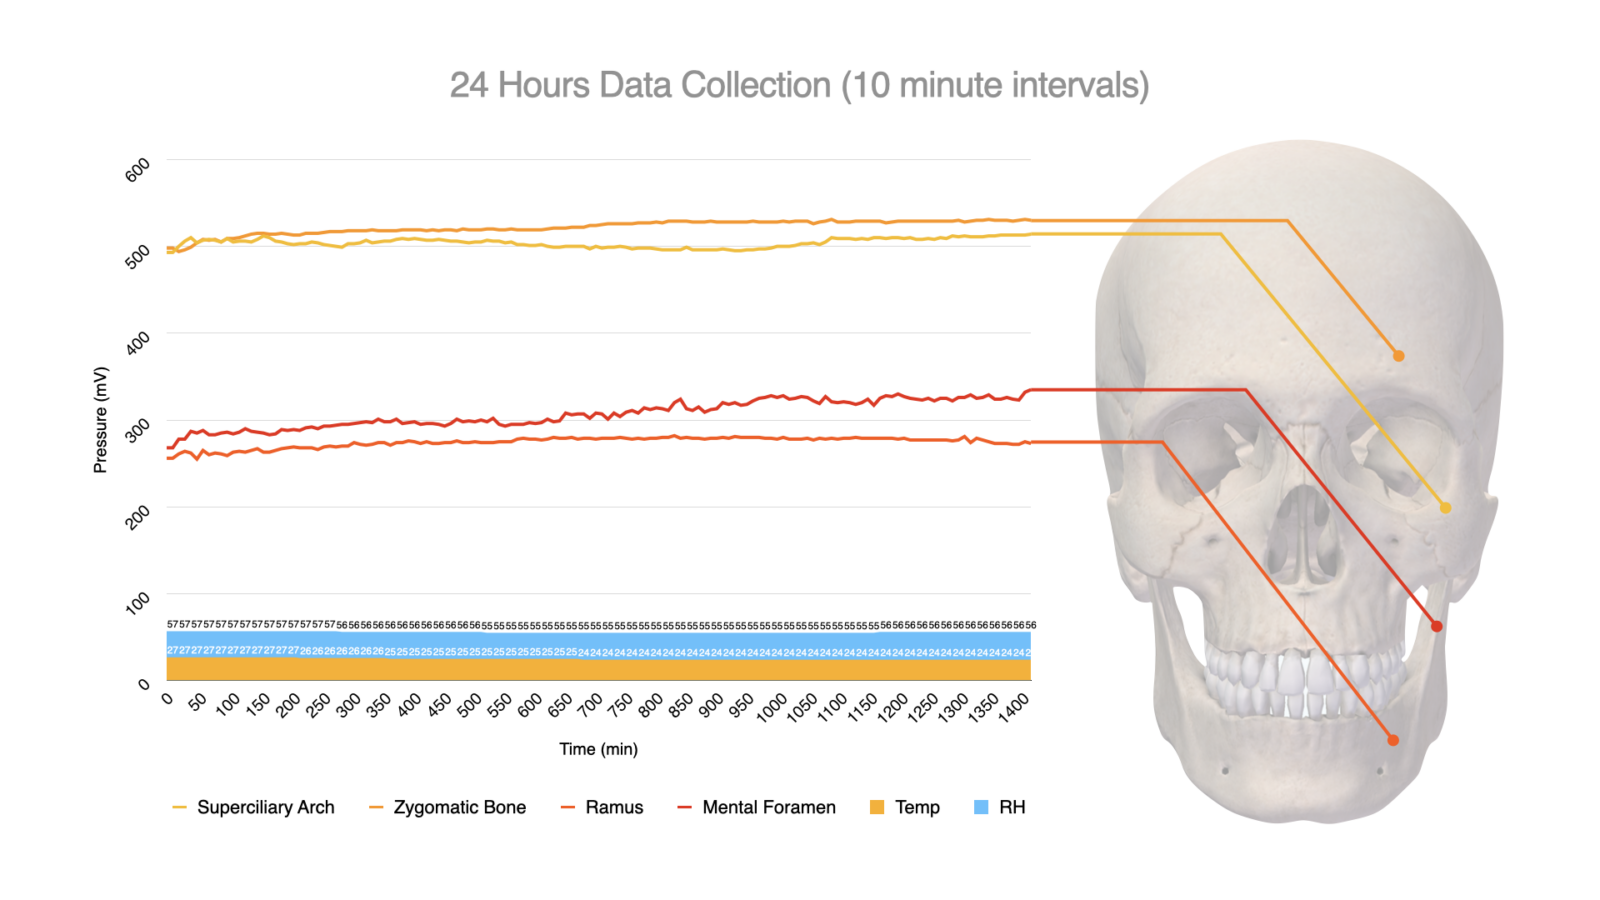 The image shows a graph for the 24-hour data collection with 10 minutes intervals. The vertical axis marked pressure (mV) and is from 0 to 600, and the horizontal axis is marked Time (min) and is from 0 to 1400.
An image of a human skull from the front is marked with the location of 4 sensors. Lines start from different places; however, all show a slight increase in the pressure over 24 hours.
At the bottom of the graph, relative humidity and temperature are shown at around 25 degrees Celcius and 55%, respectively. 